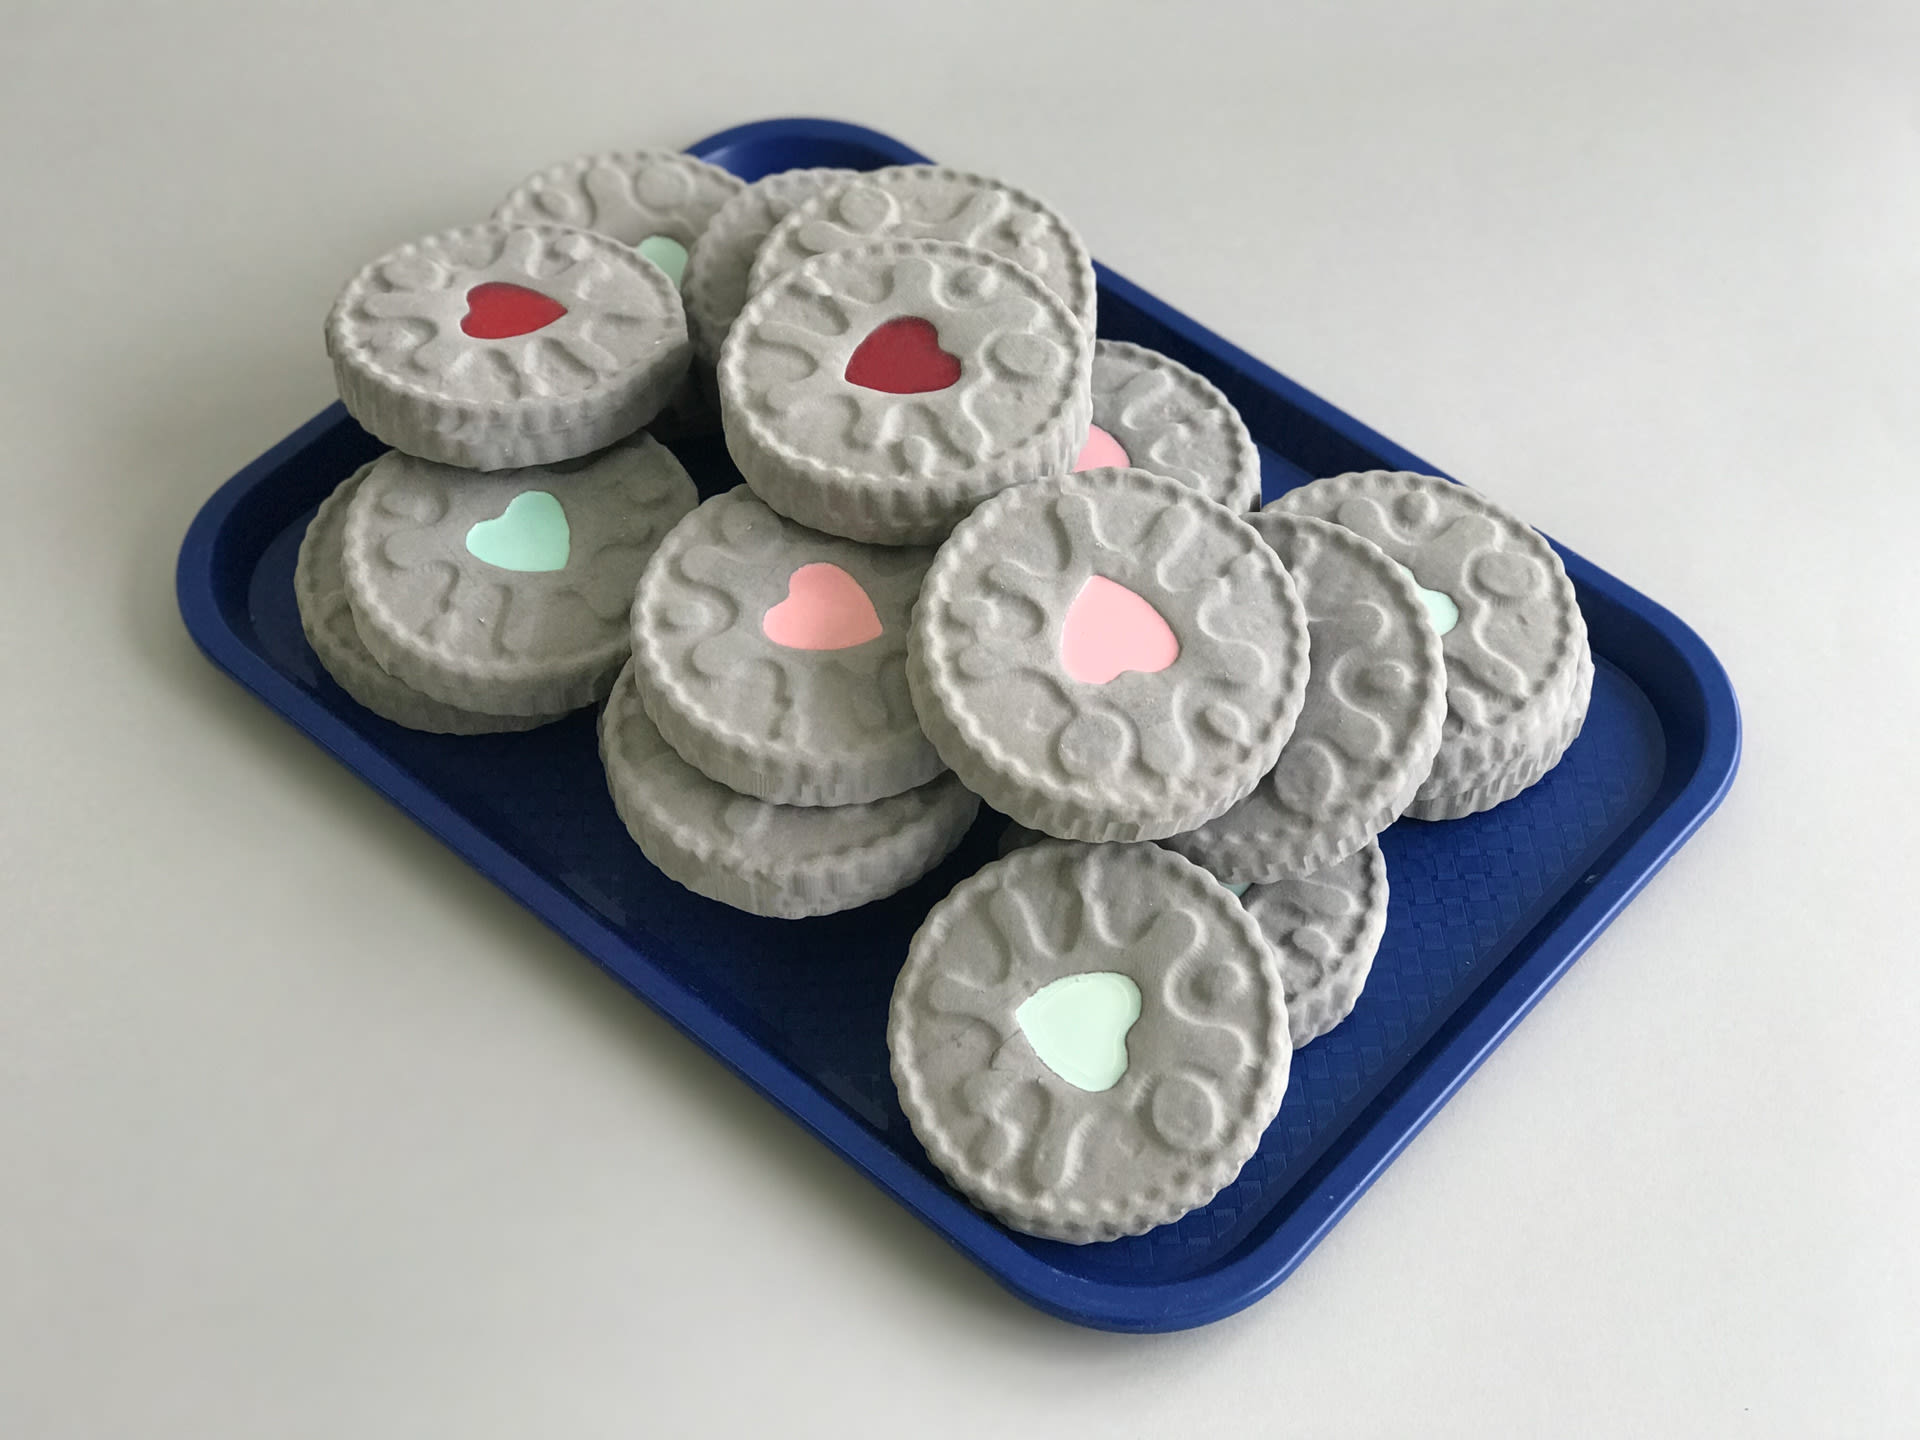 Photograph of a blue rectangular tray filled with biscuits resembling Jammy Dodger made from a hard grey substance, with heart-shaped centres filled in either pale green, pale pink or red.